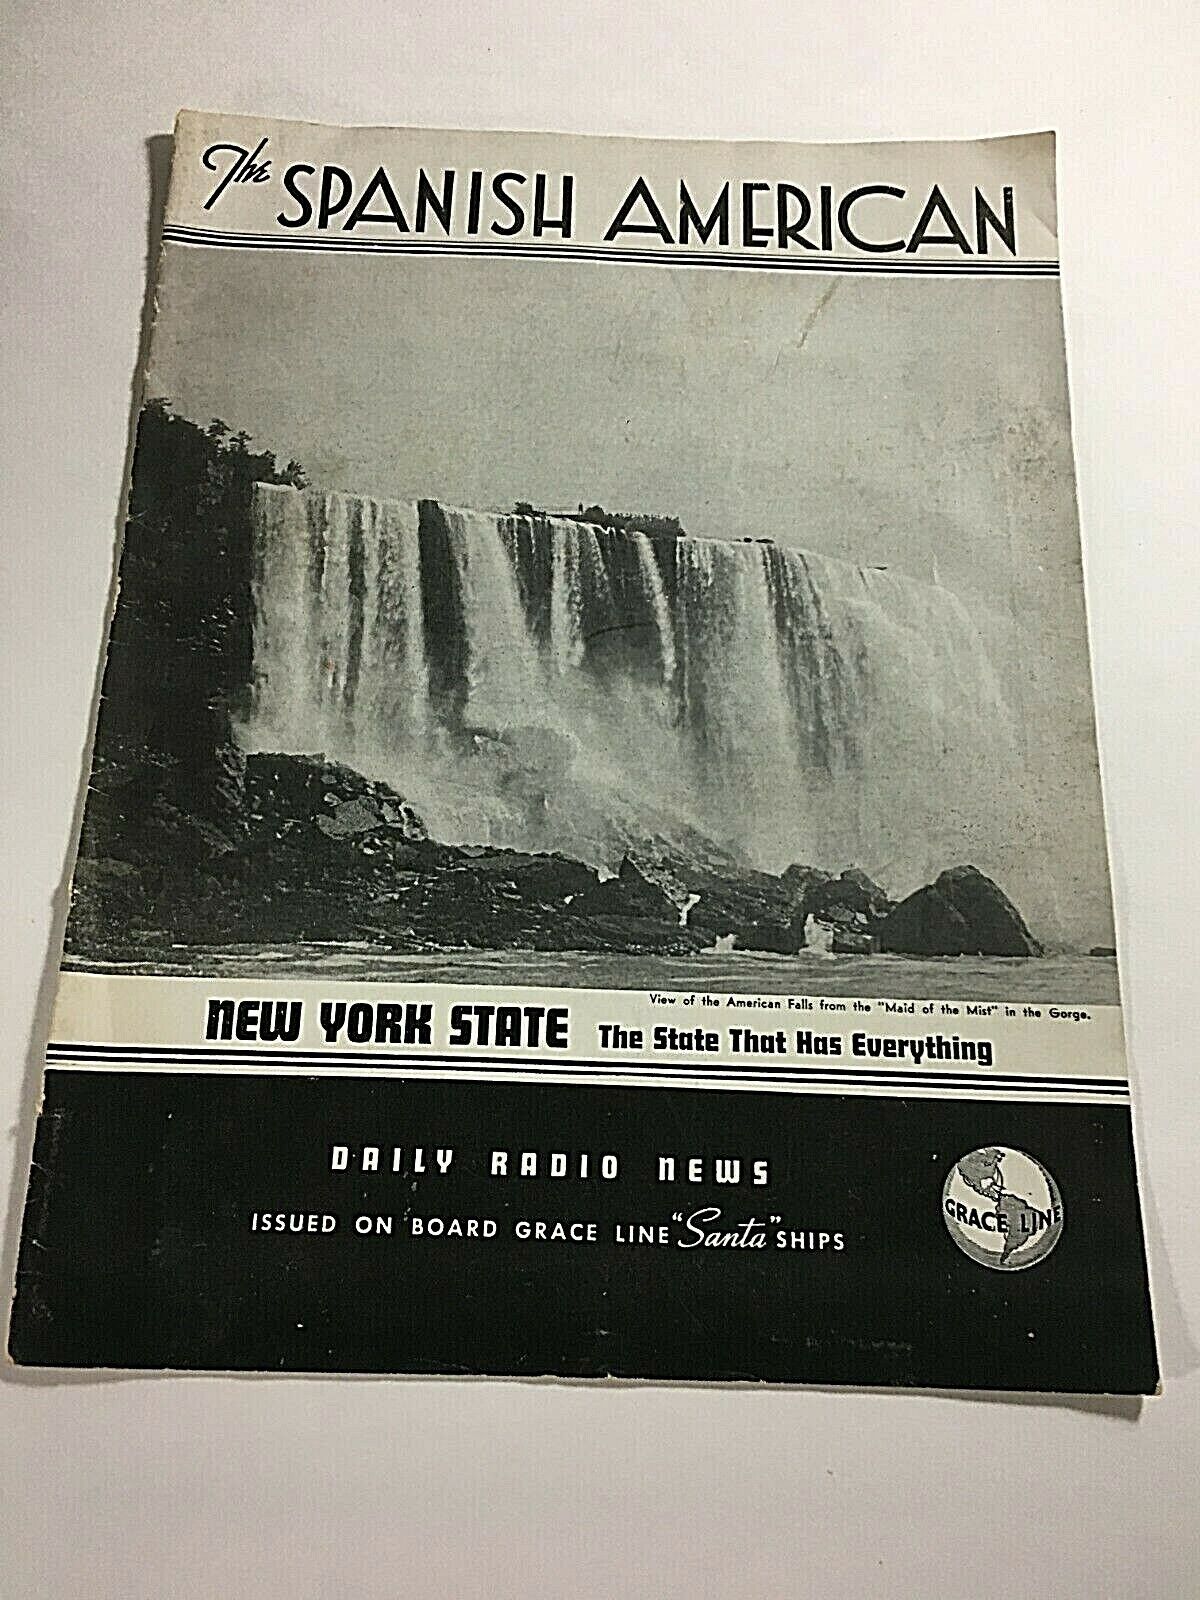 1939 Spanish American New York State Daily Radio News Issued by Grace Line Ships